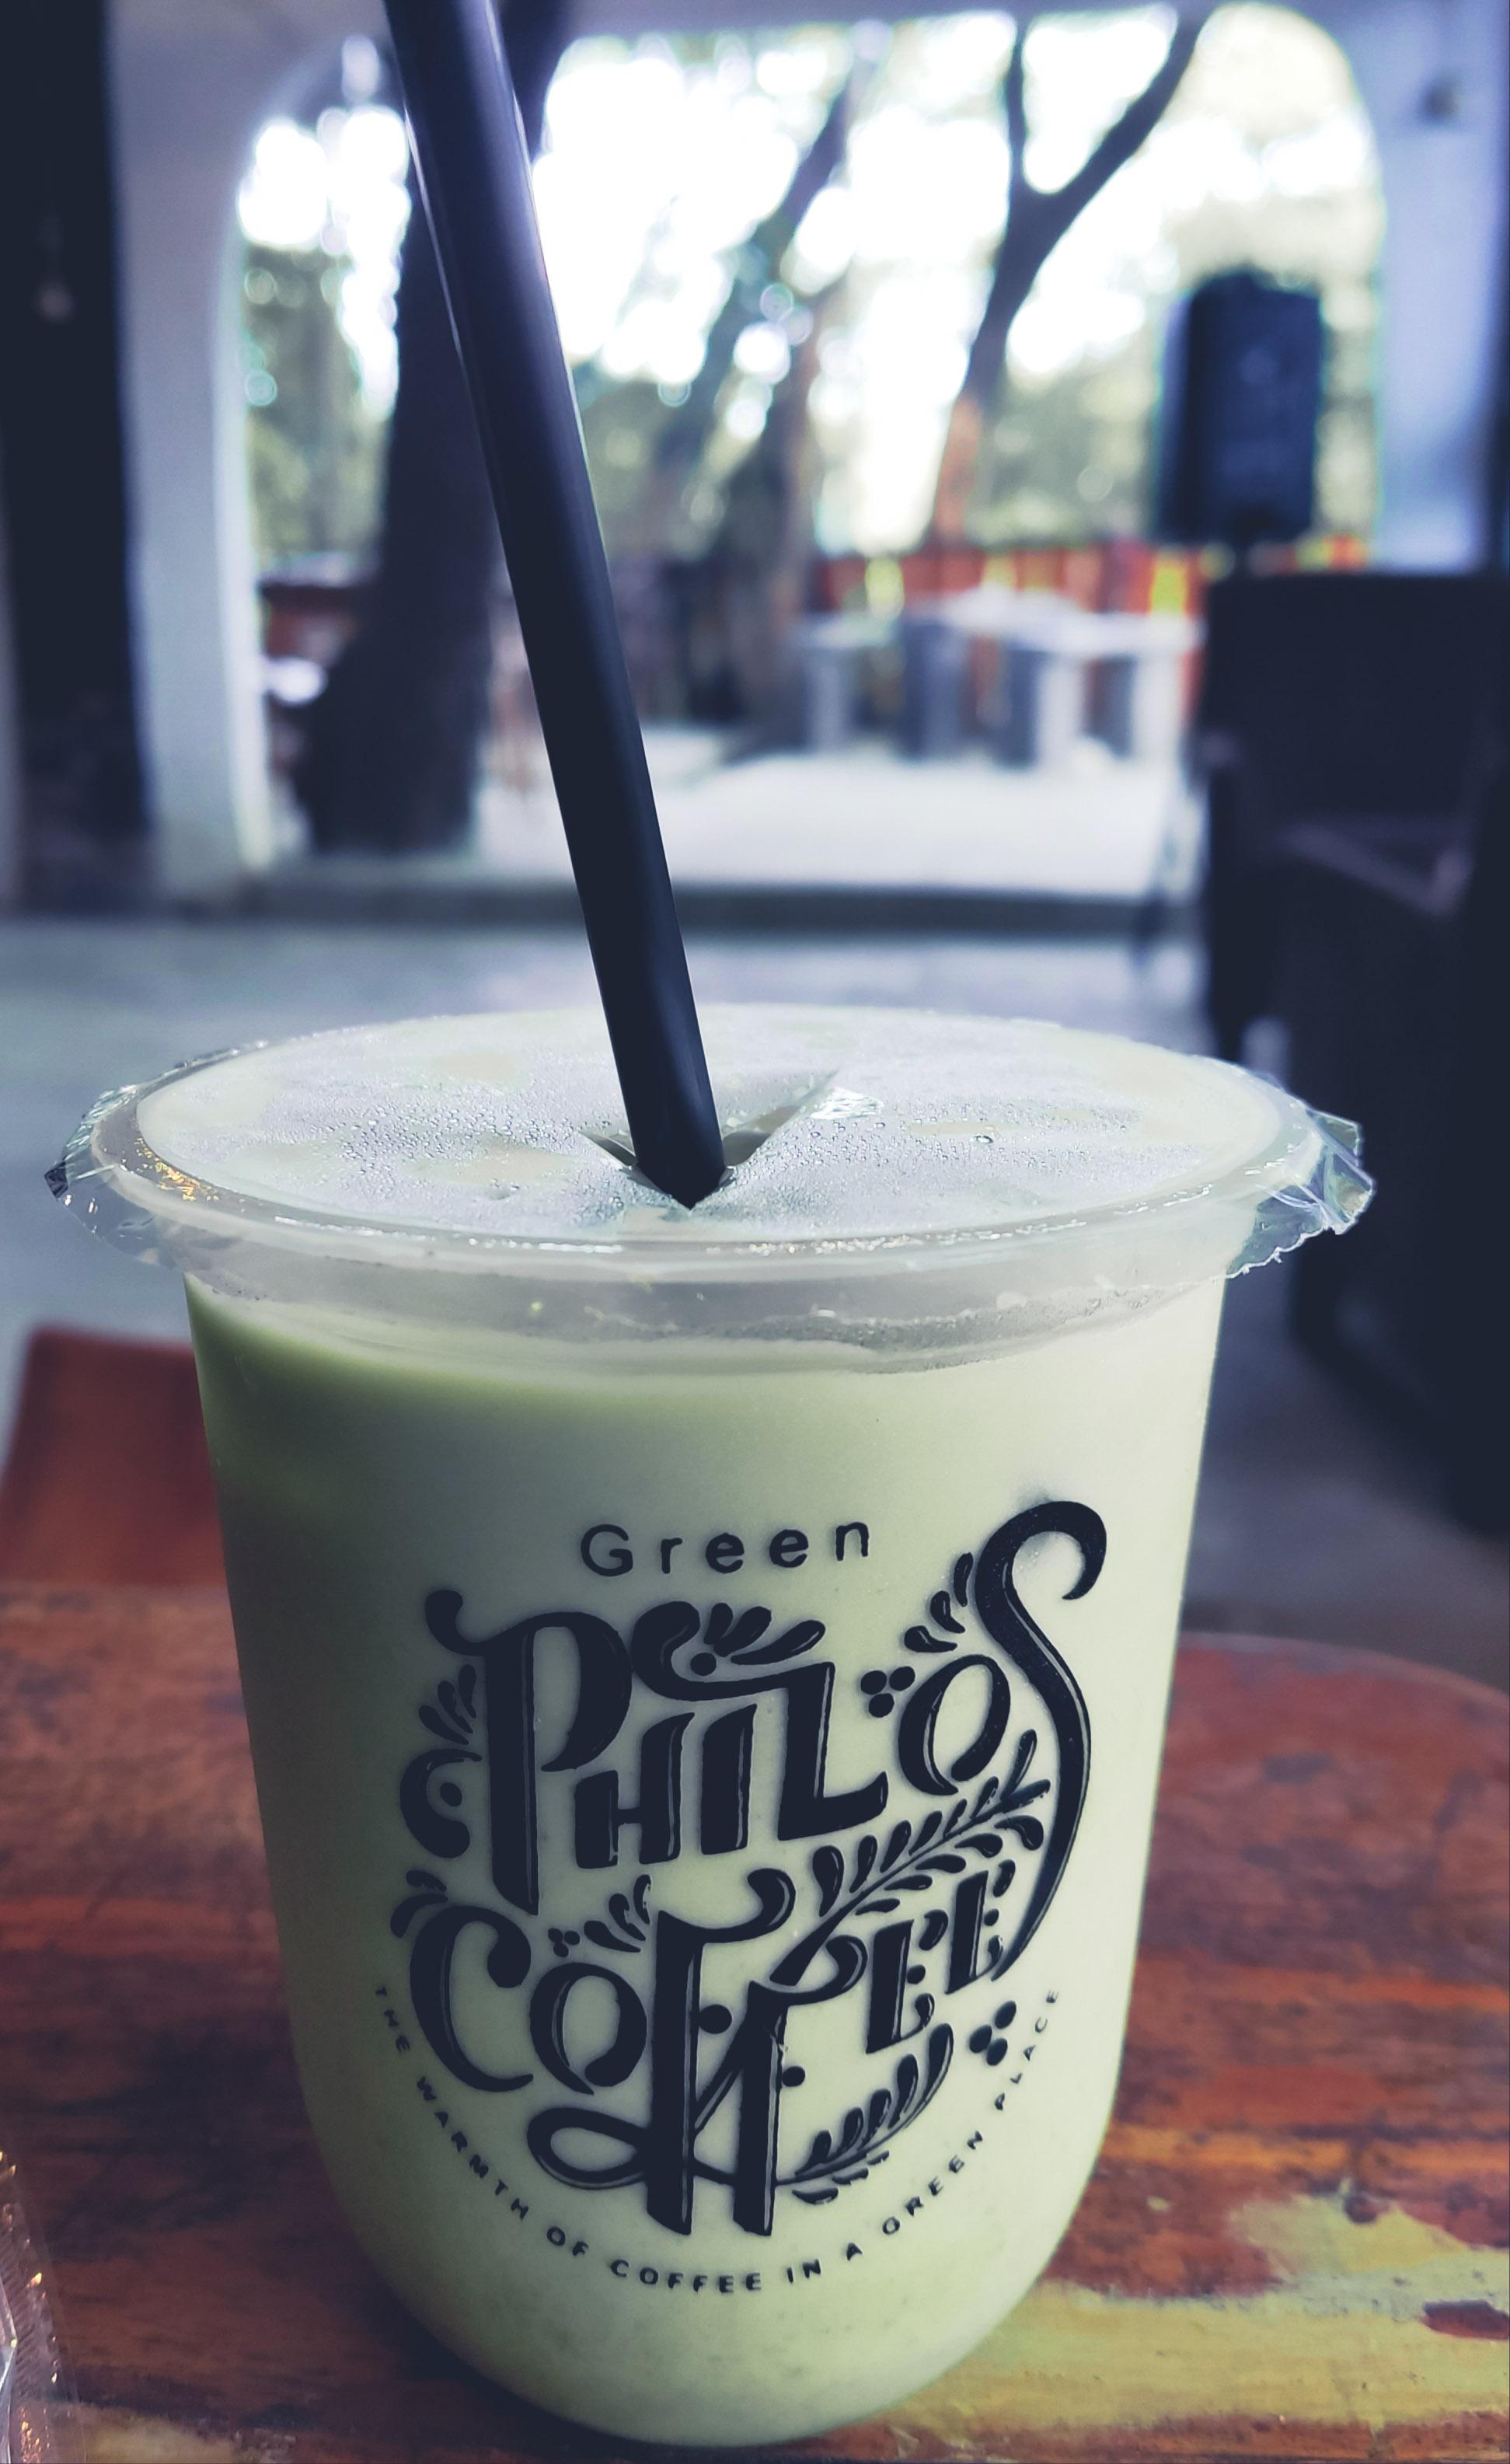 Green Philos Coffee review